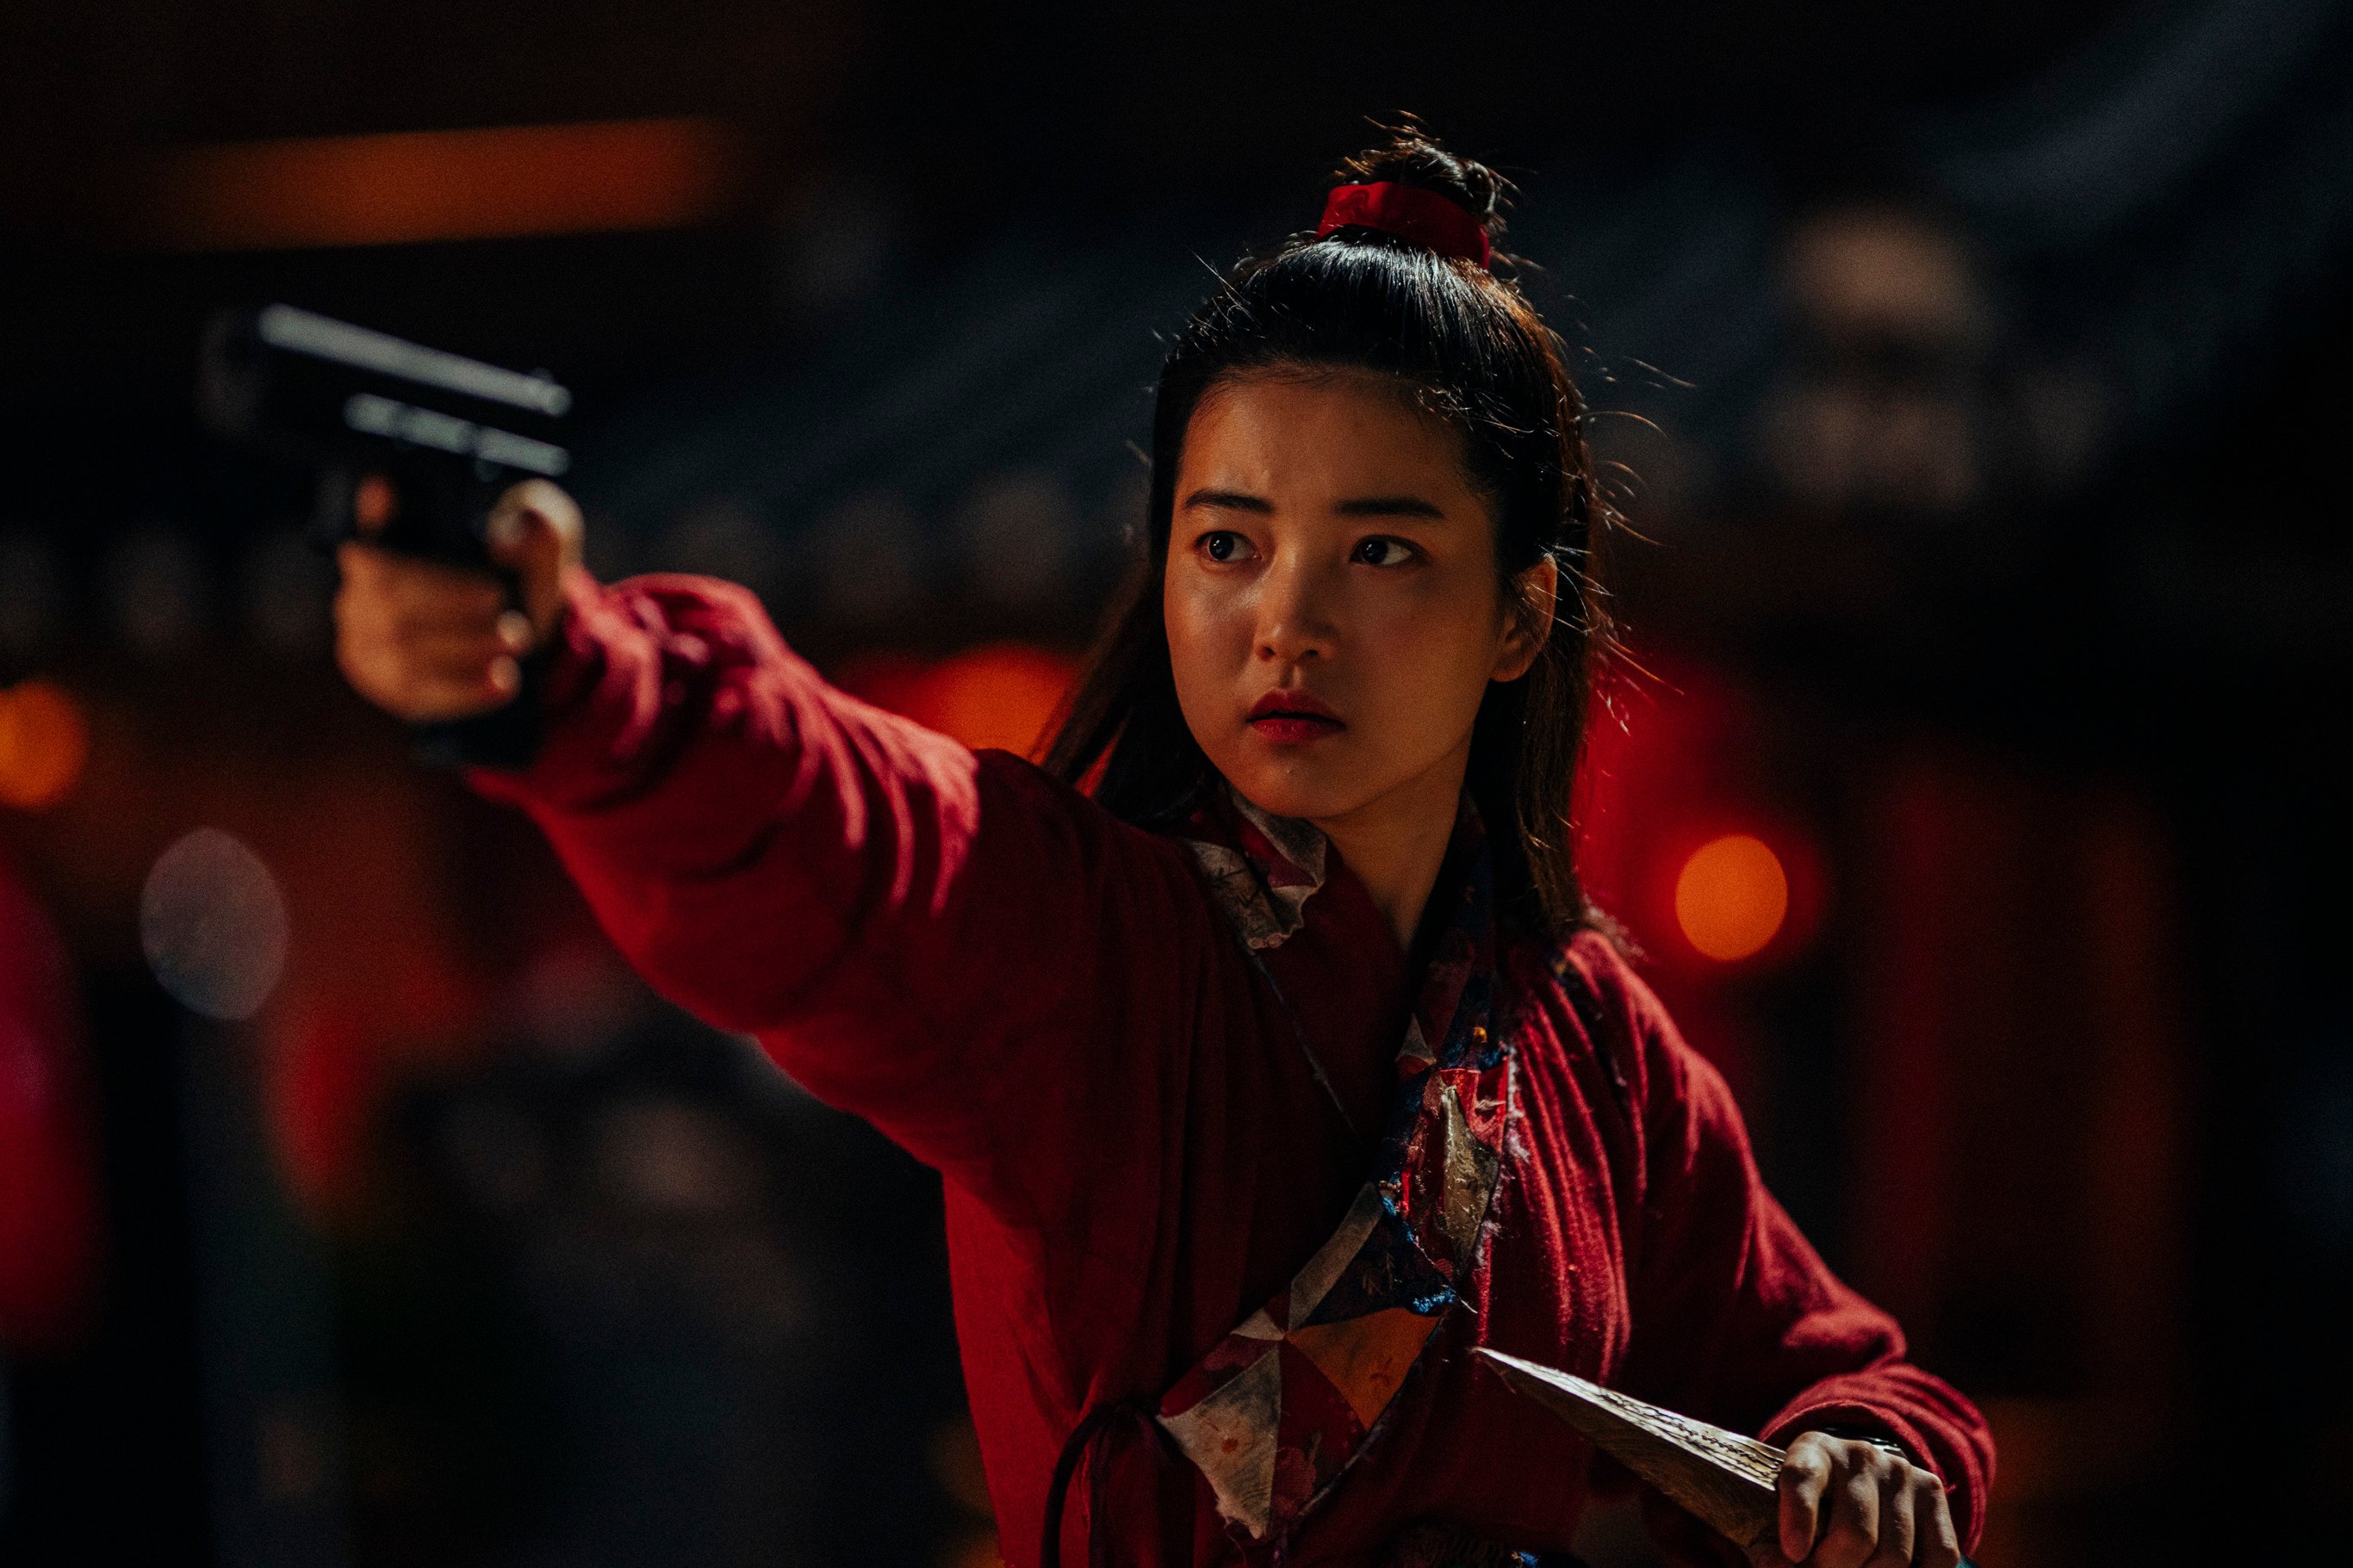 Kim Tae-ri in a still from Alienoid, directed by Choi Dong-hoon.